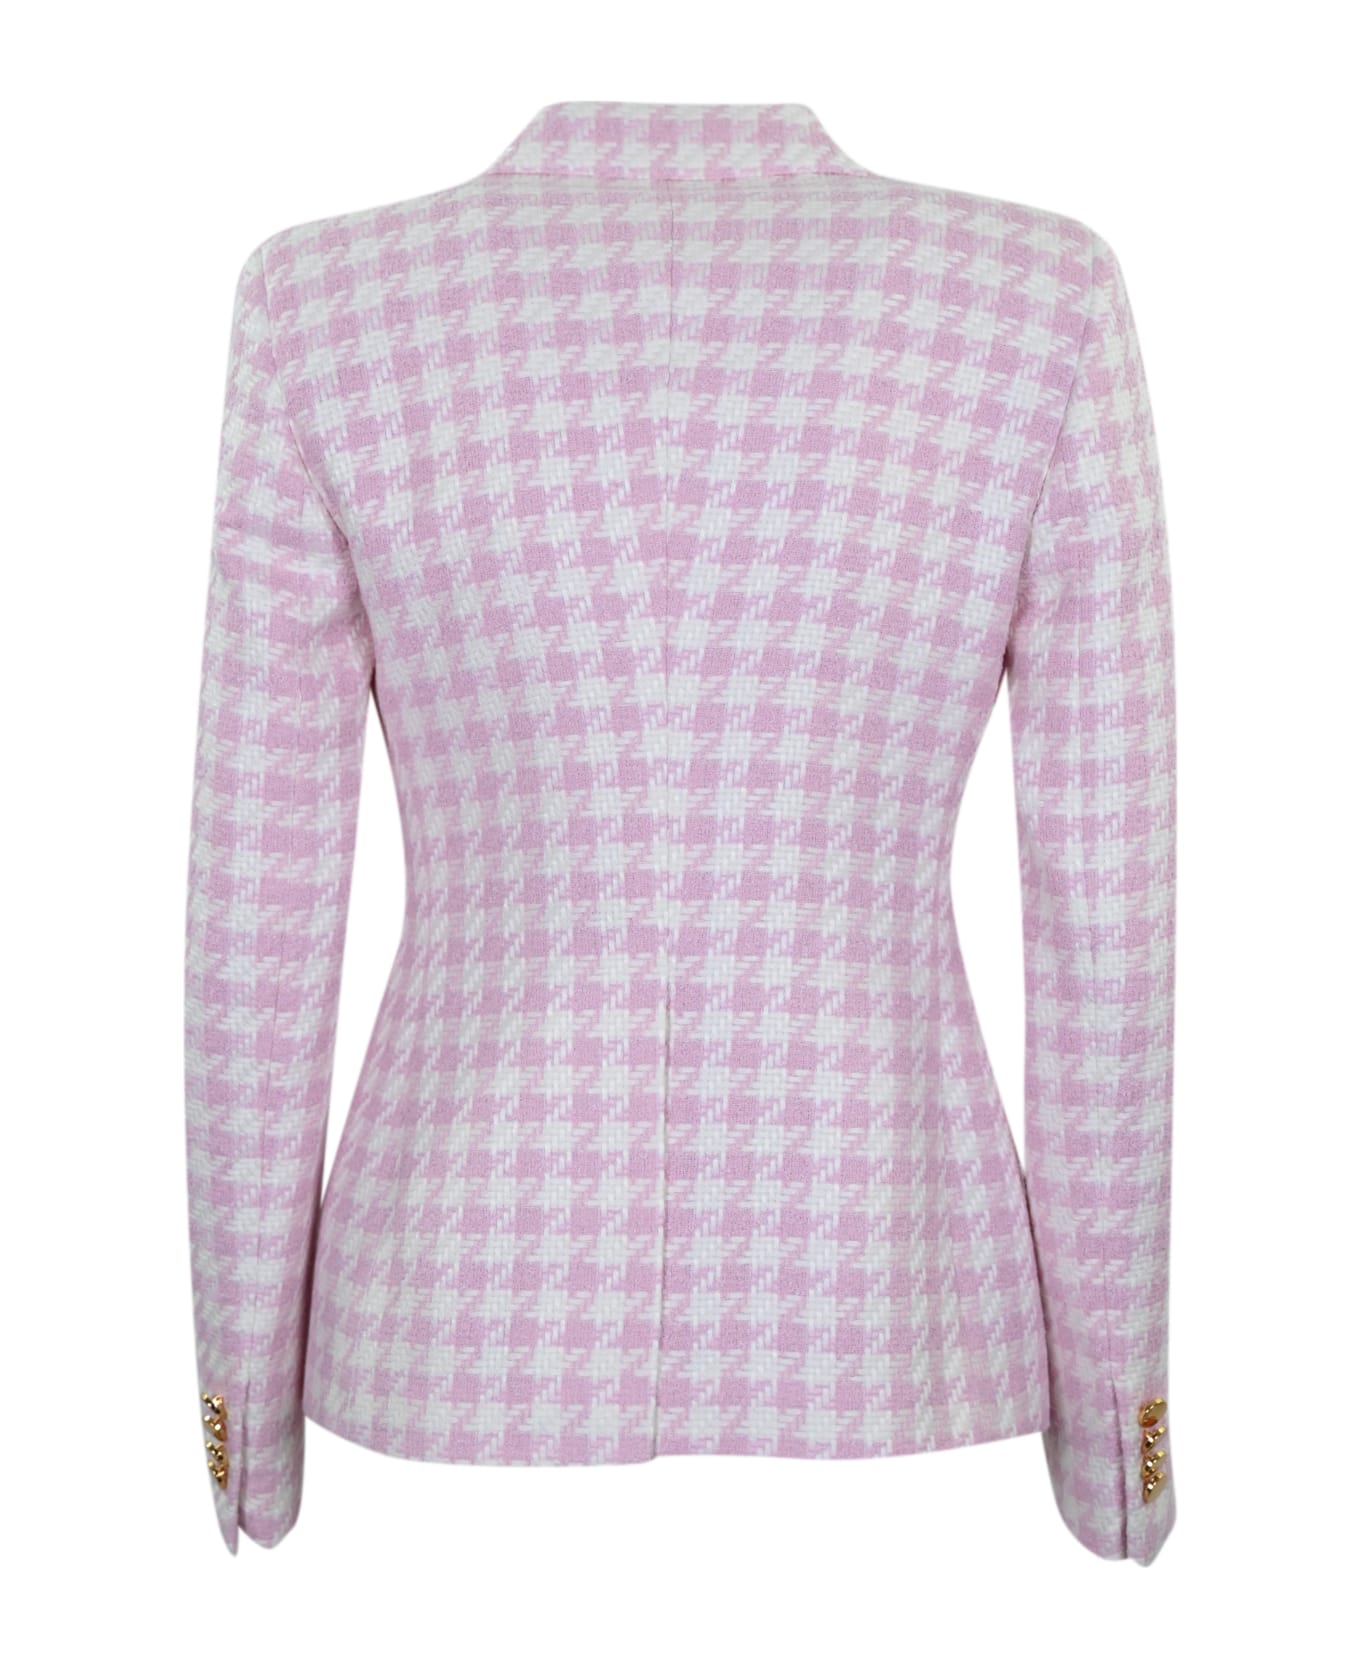 Tagliatore J-alicya Double-breasted Jacket In Pink And White - Rosa/bianco